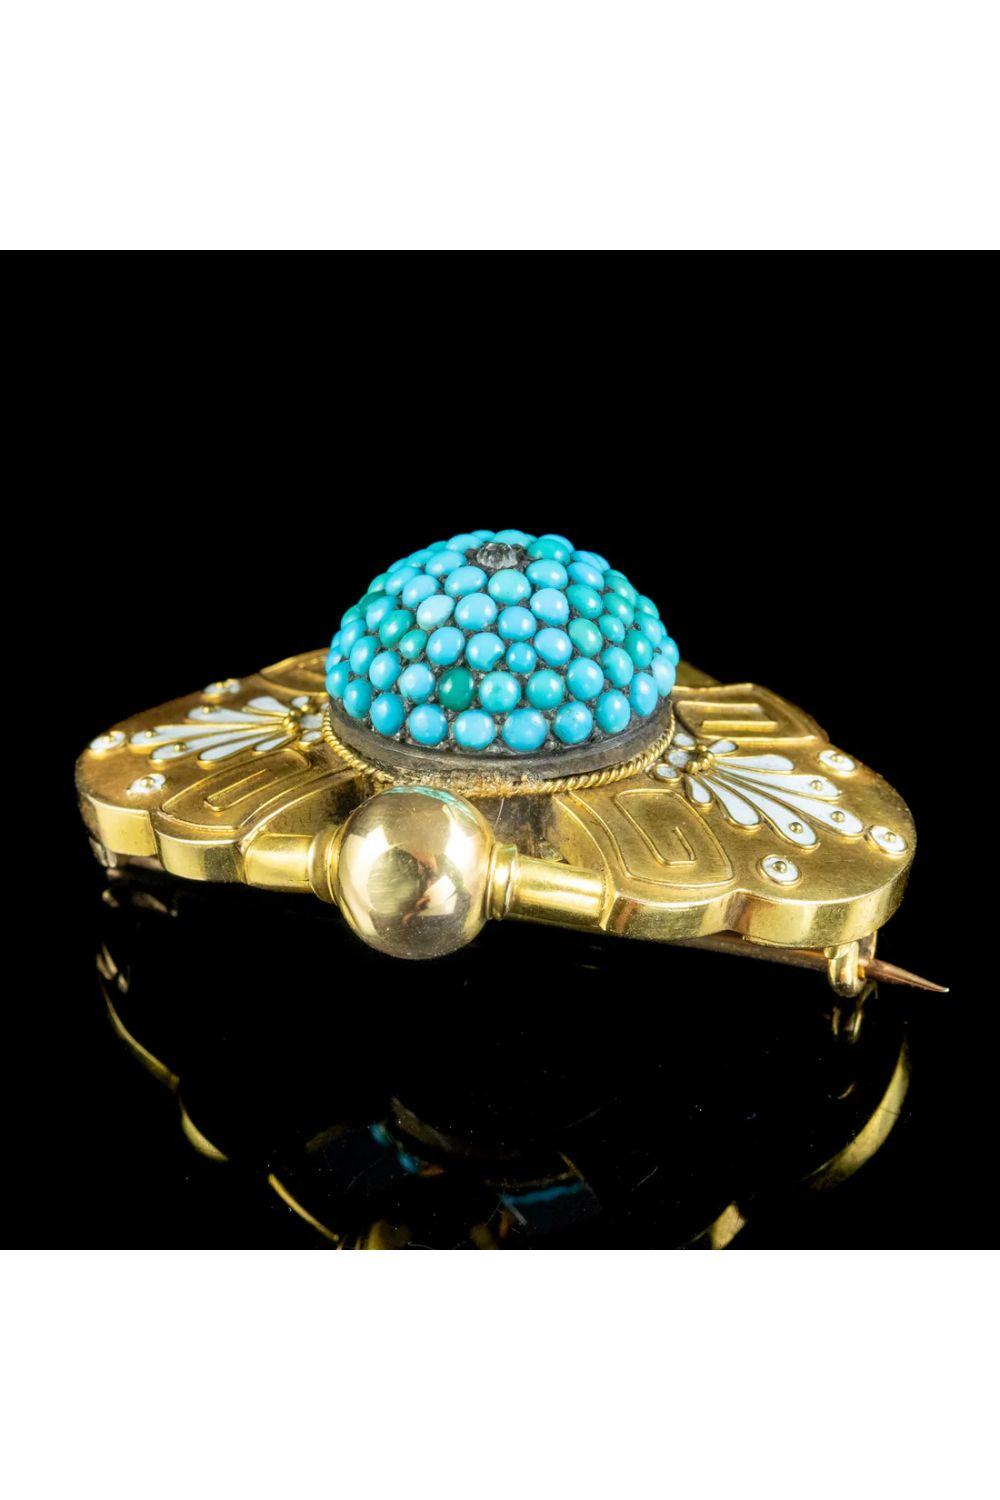 Victorian Etruscan Turquoise Diamond Mourning Brooch in 18ct Gold., circa 1860 – 1880 For Sale